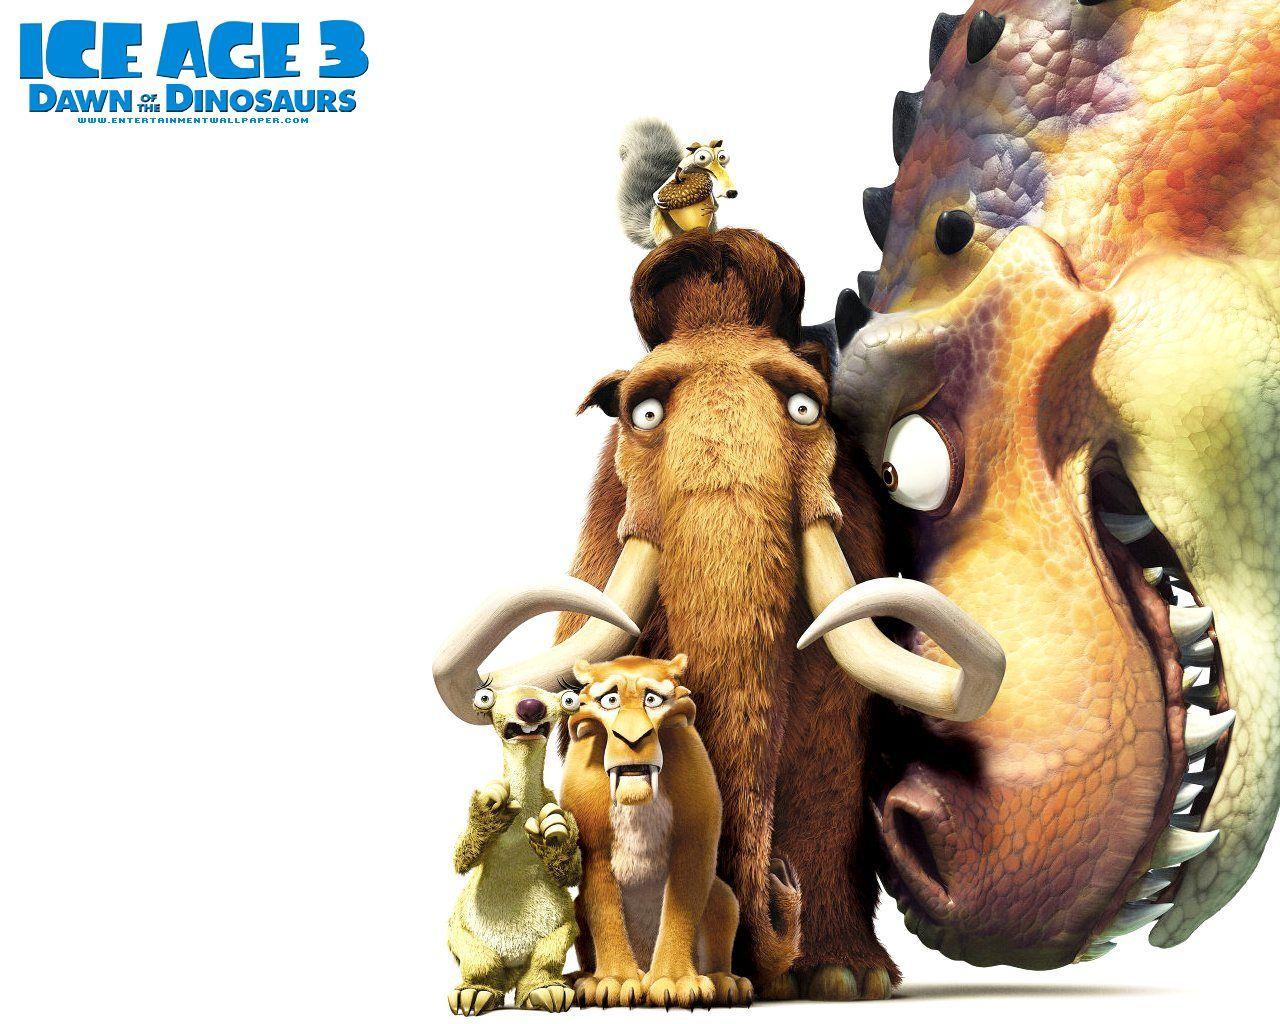 Ice Age 3! Age 3: dawn of the dinosaurs Wallpaper